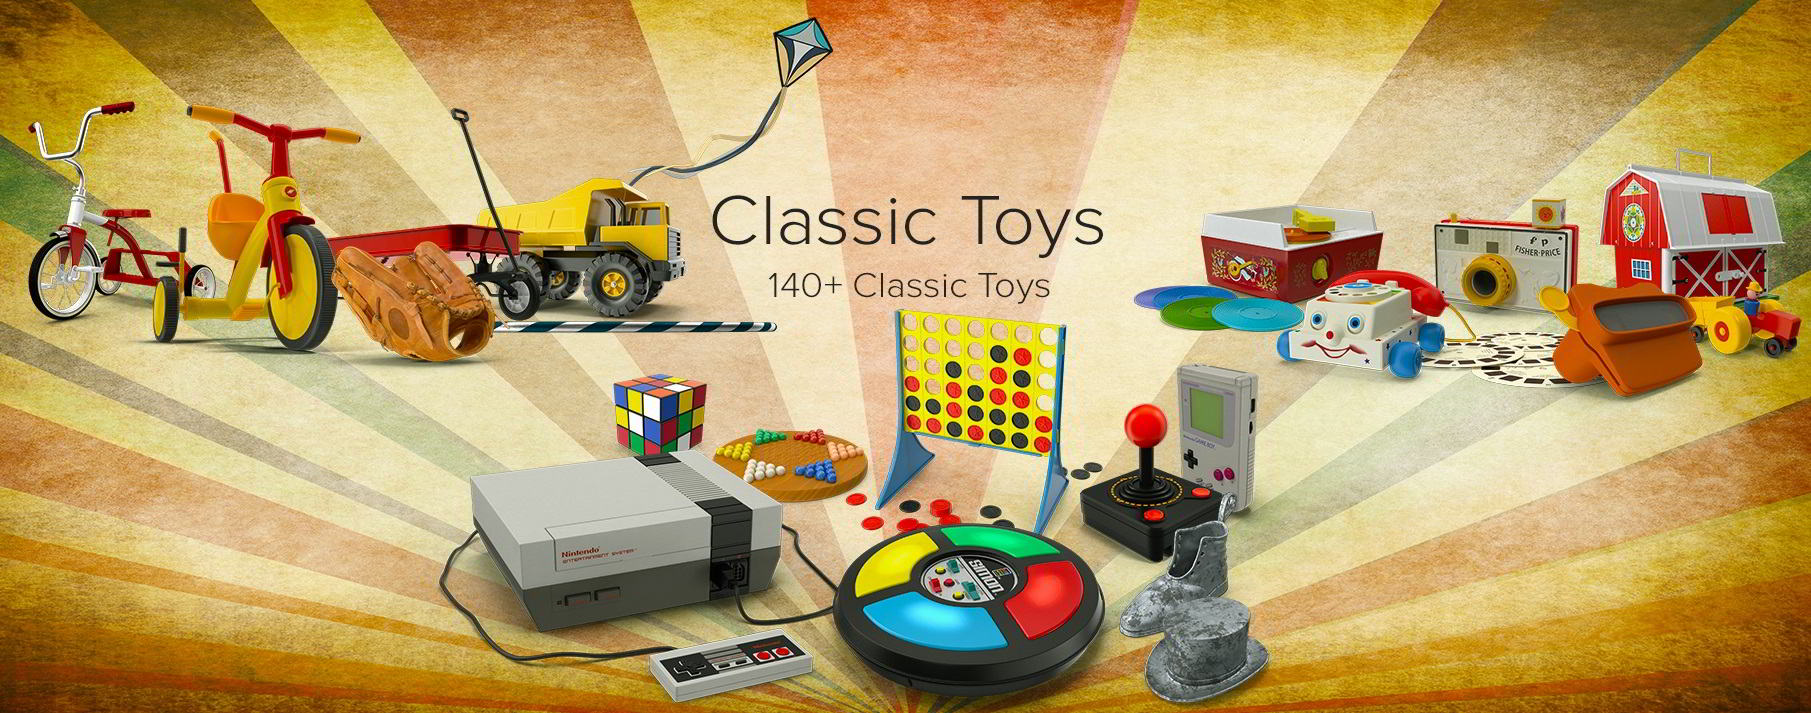 PixelSquid – Classic Toys Collection free download